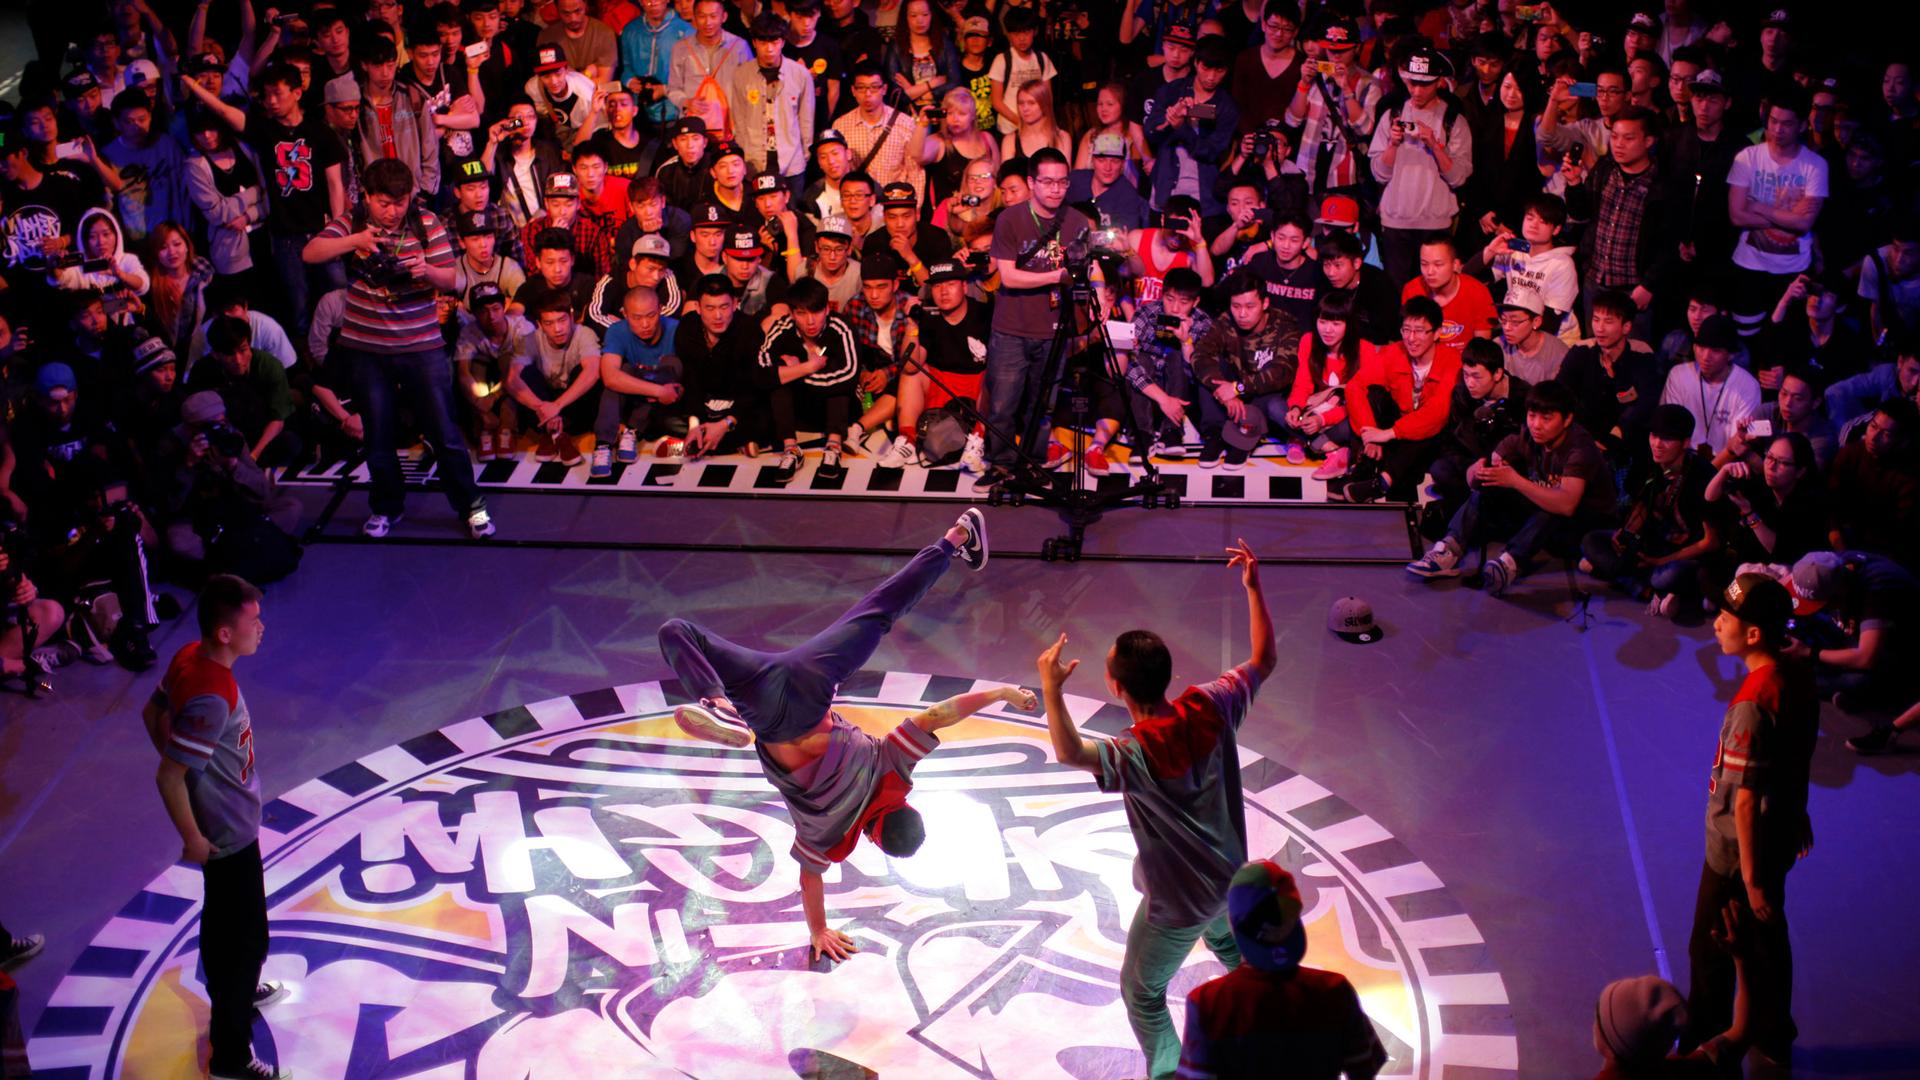 Several breakdancers perform on stage with a large crowd watching.